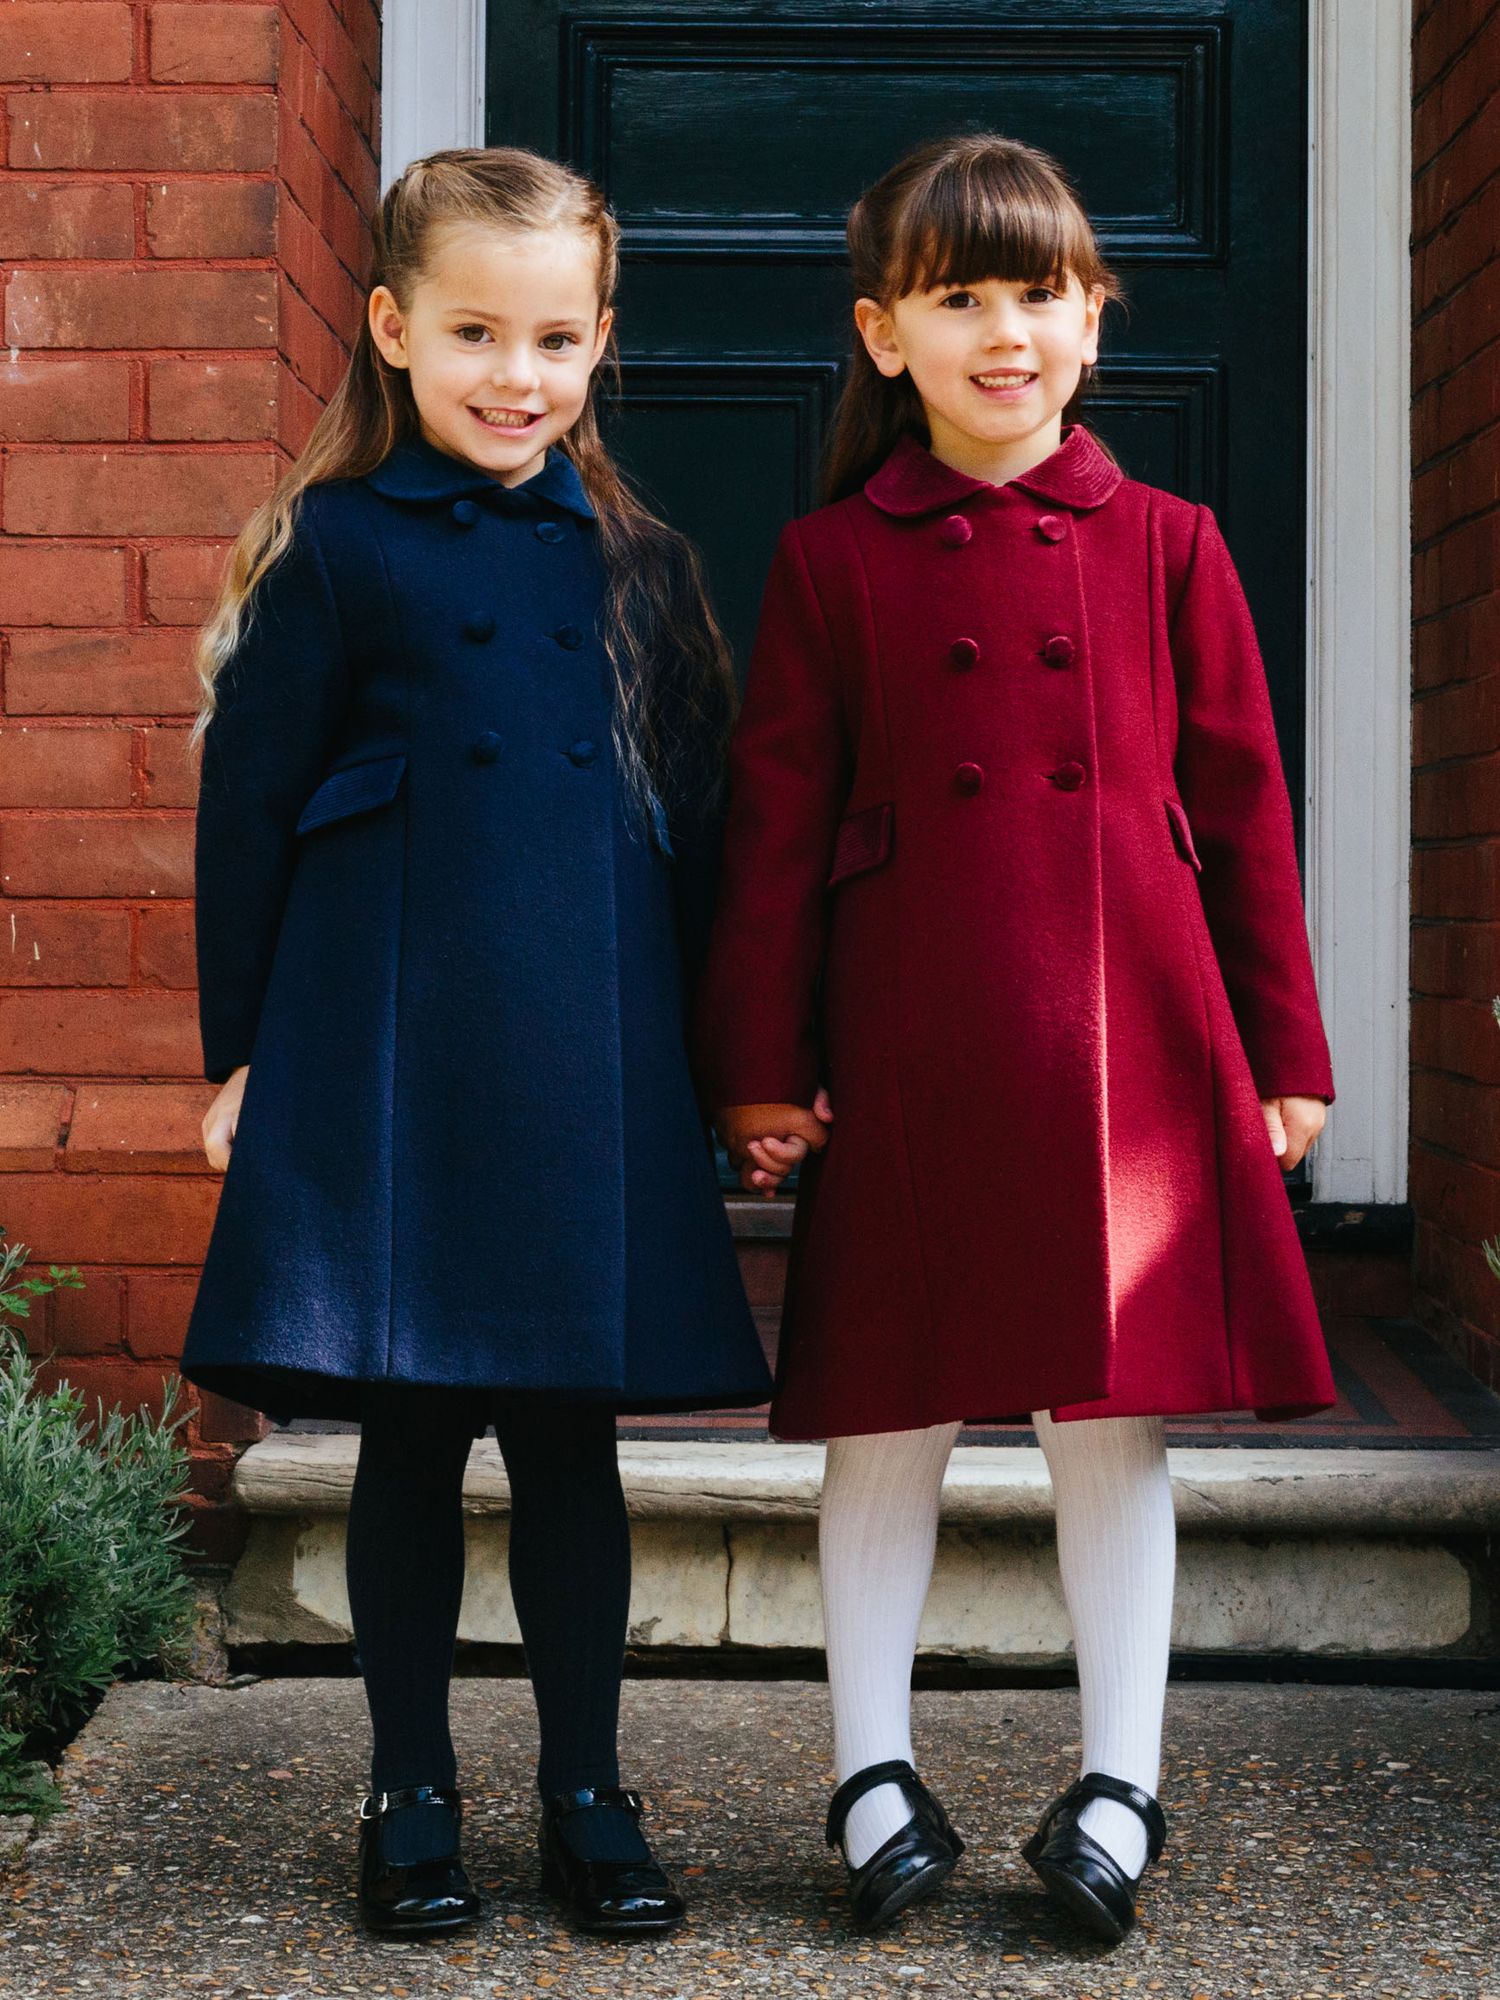 Trotters Kids' Classic Double Breasted Coat, Burgundy, 2 years